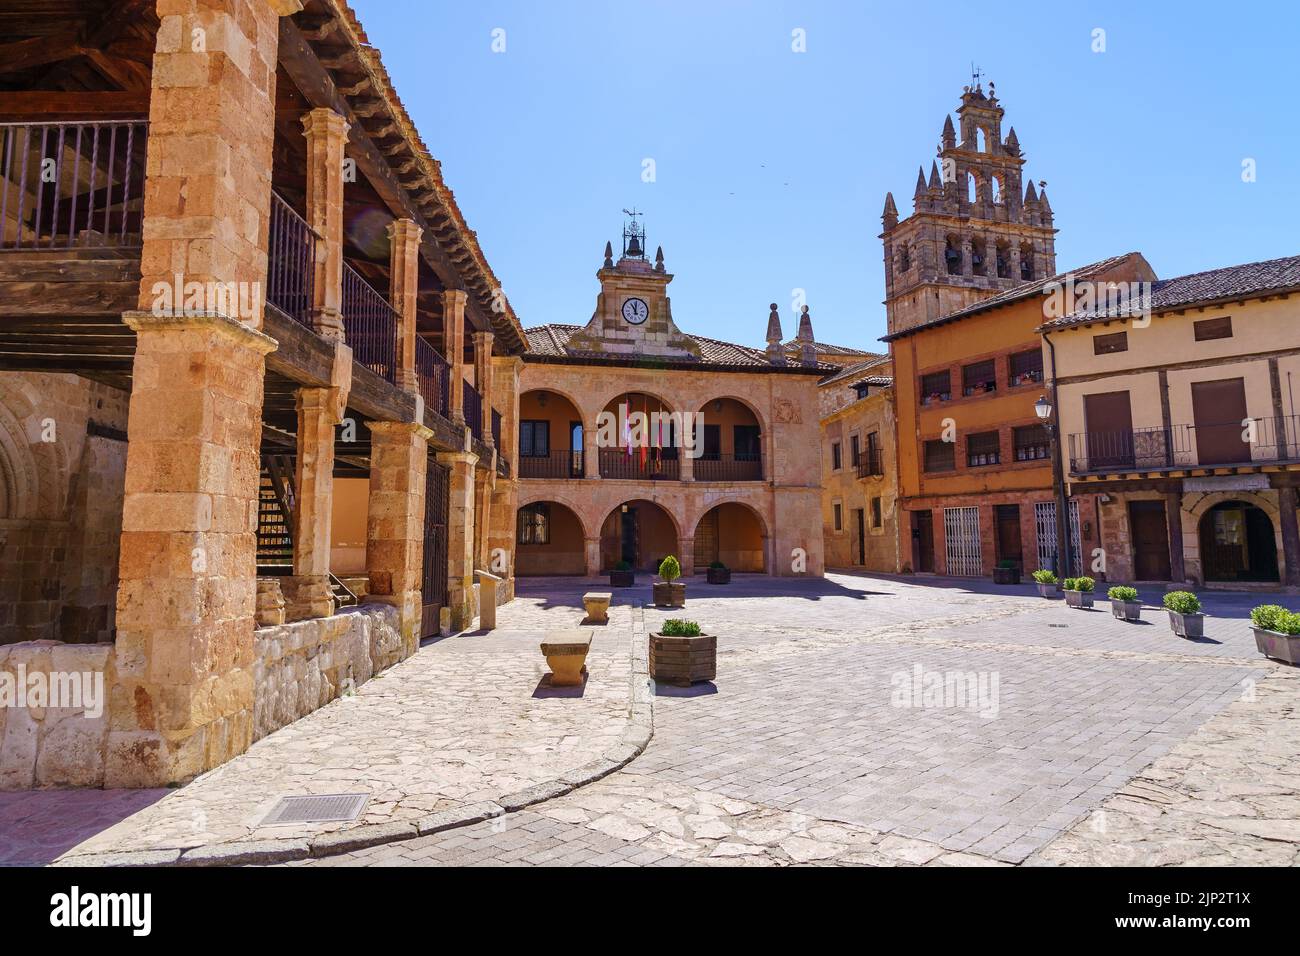 Church and Town Hall in the town square. Ayllon, Segovia, Spain. Stock Photo